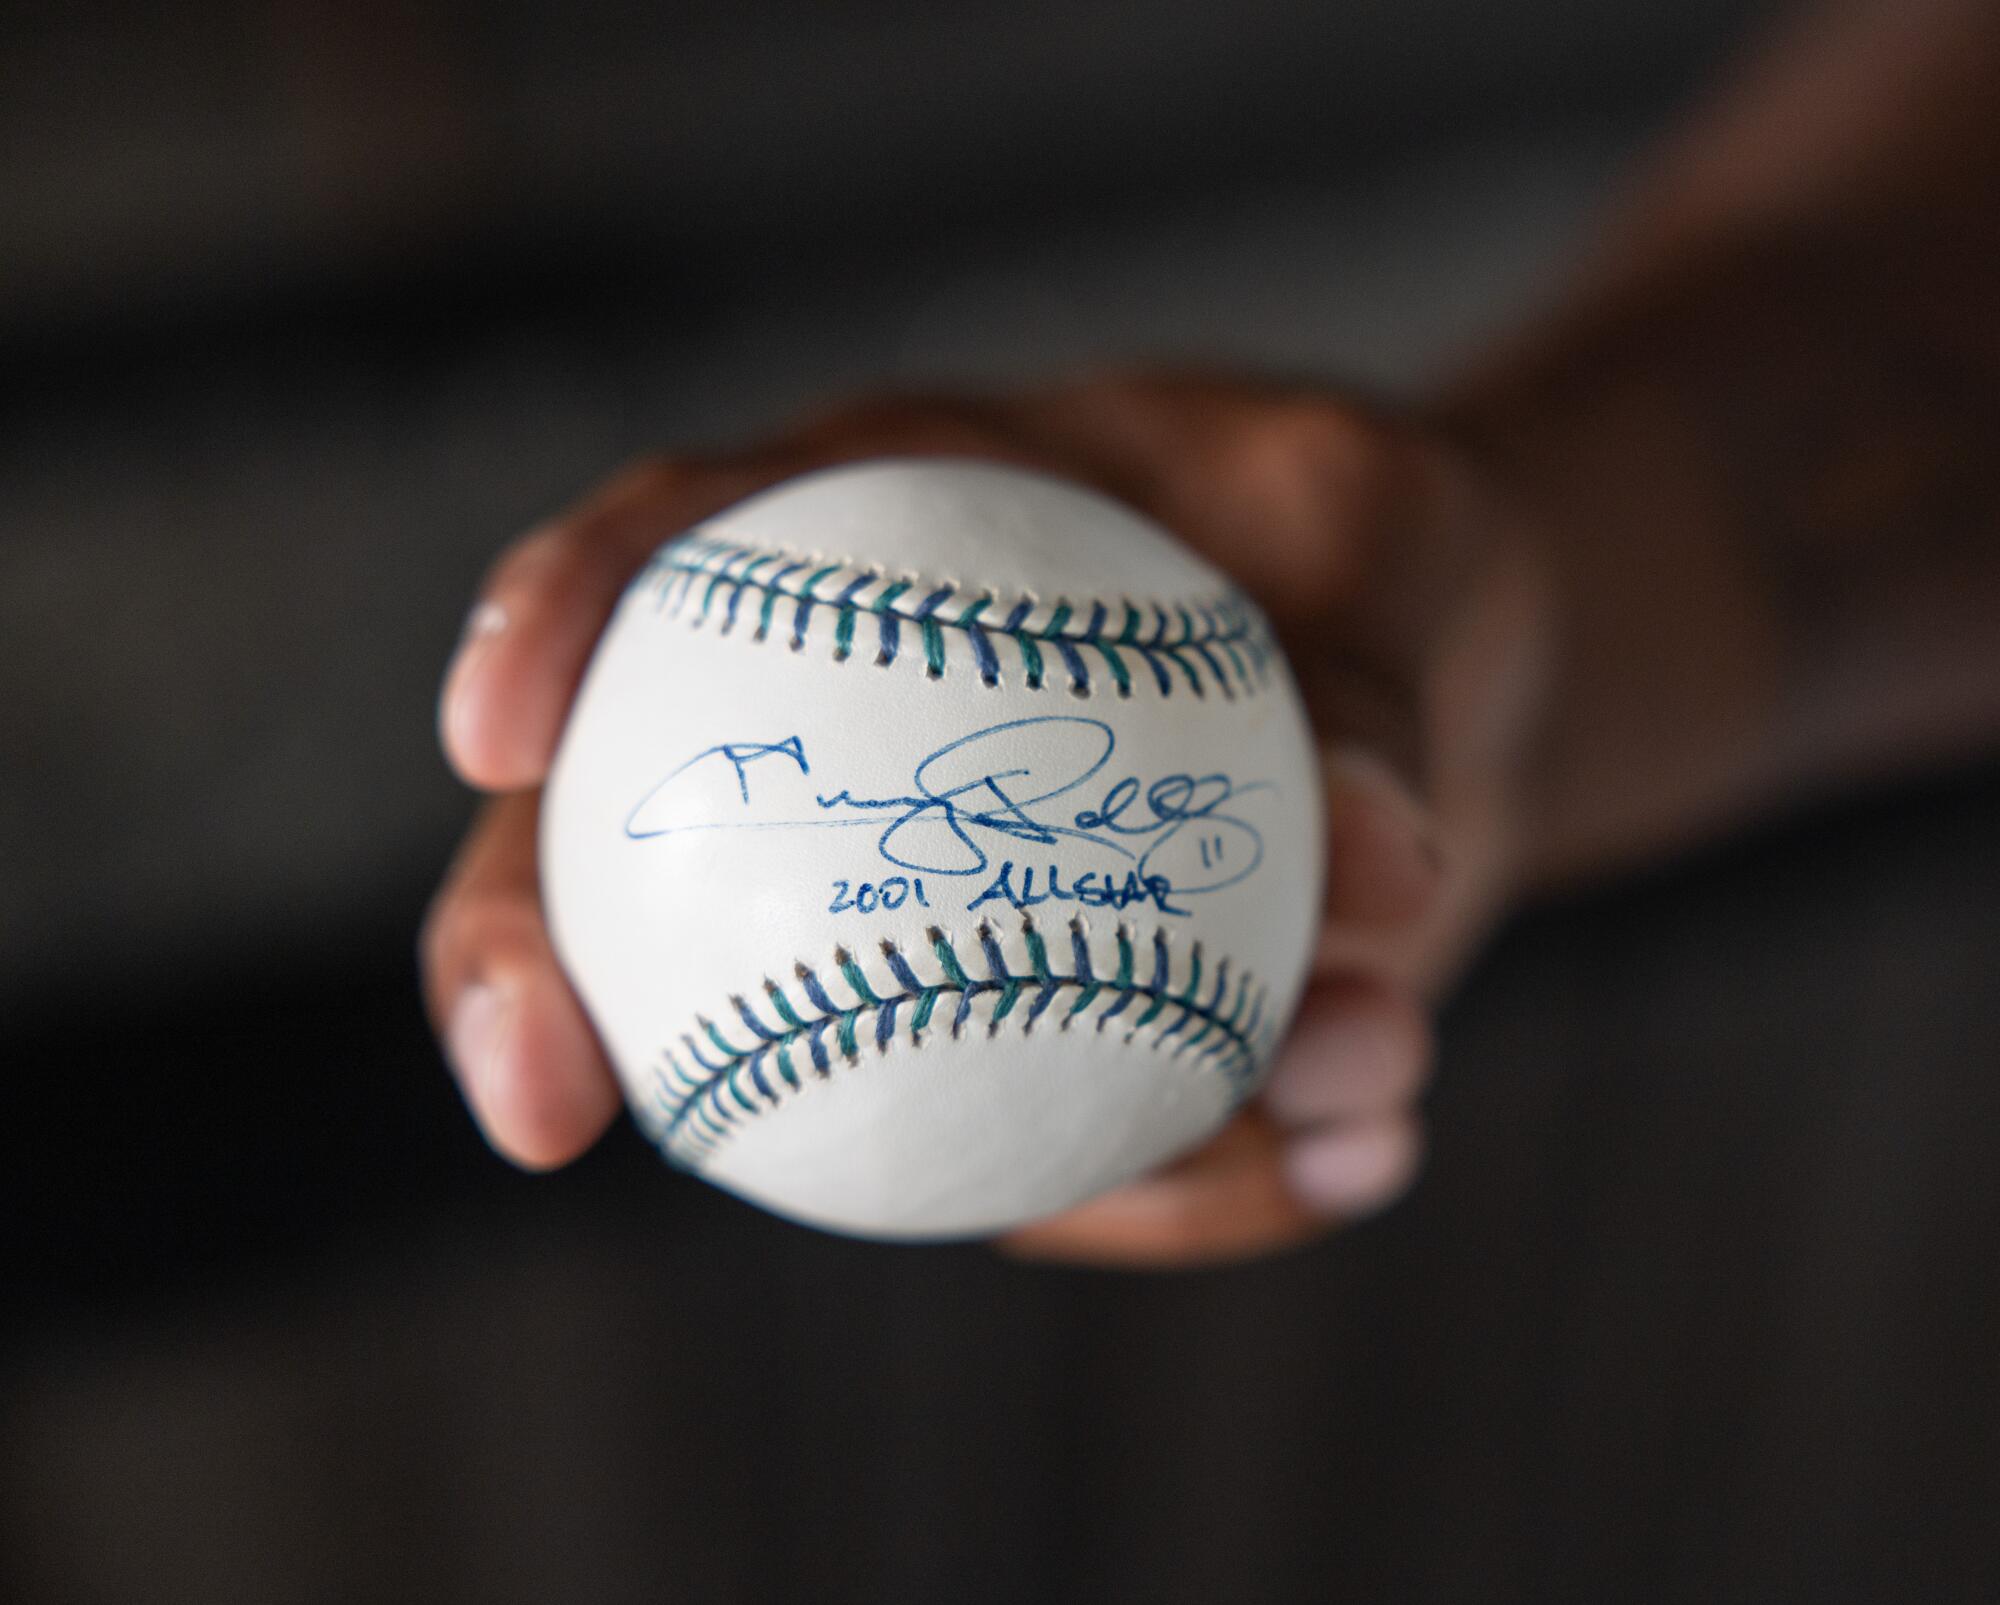 Jimmy Rollins shows off a baseball he had autographed during the 2001 MLB All-Star Game. 